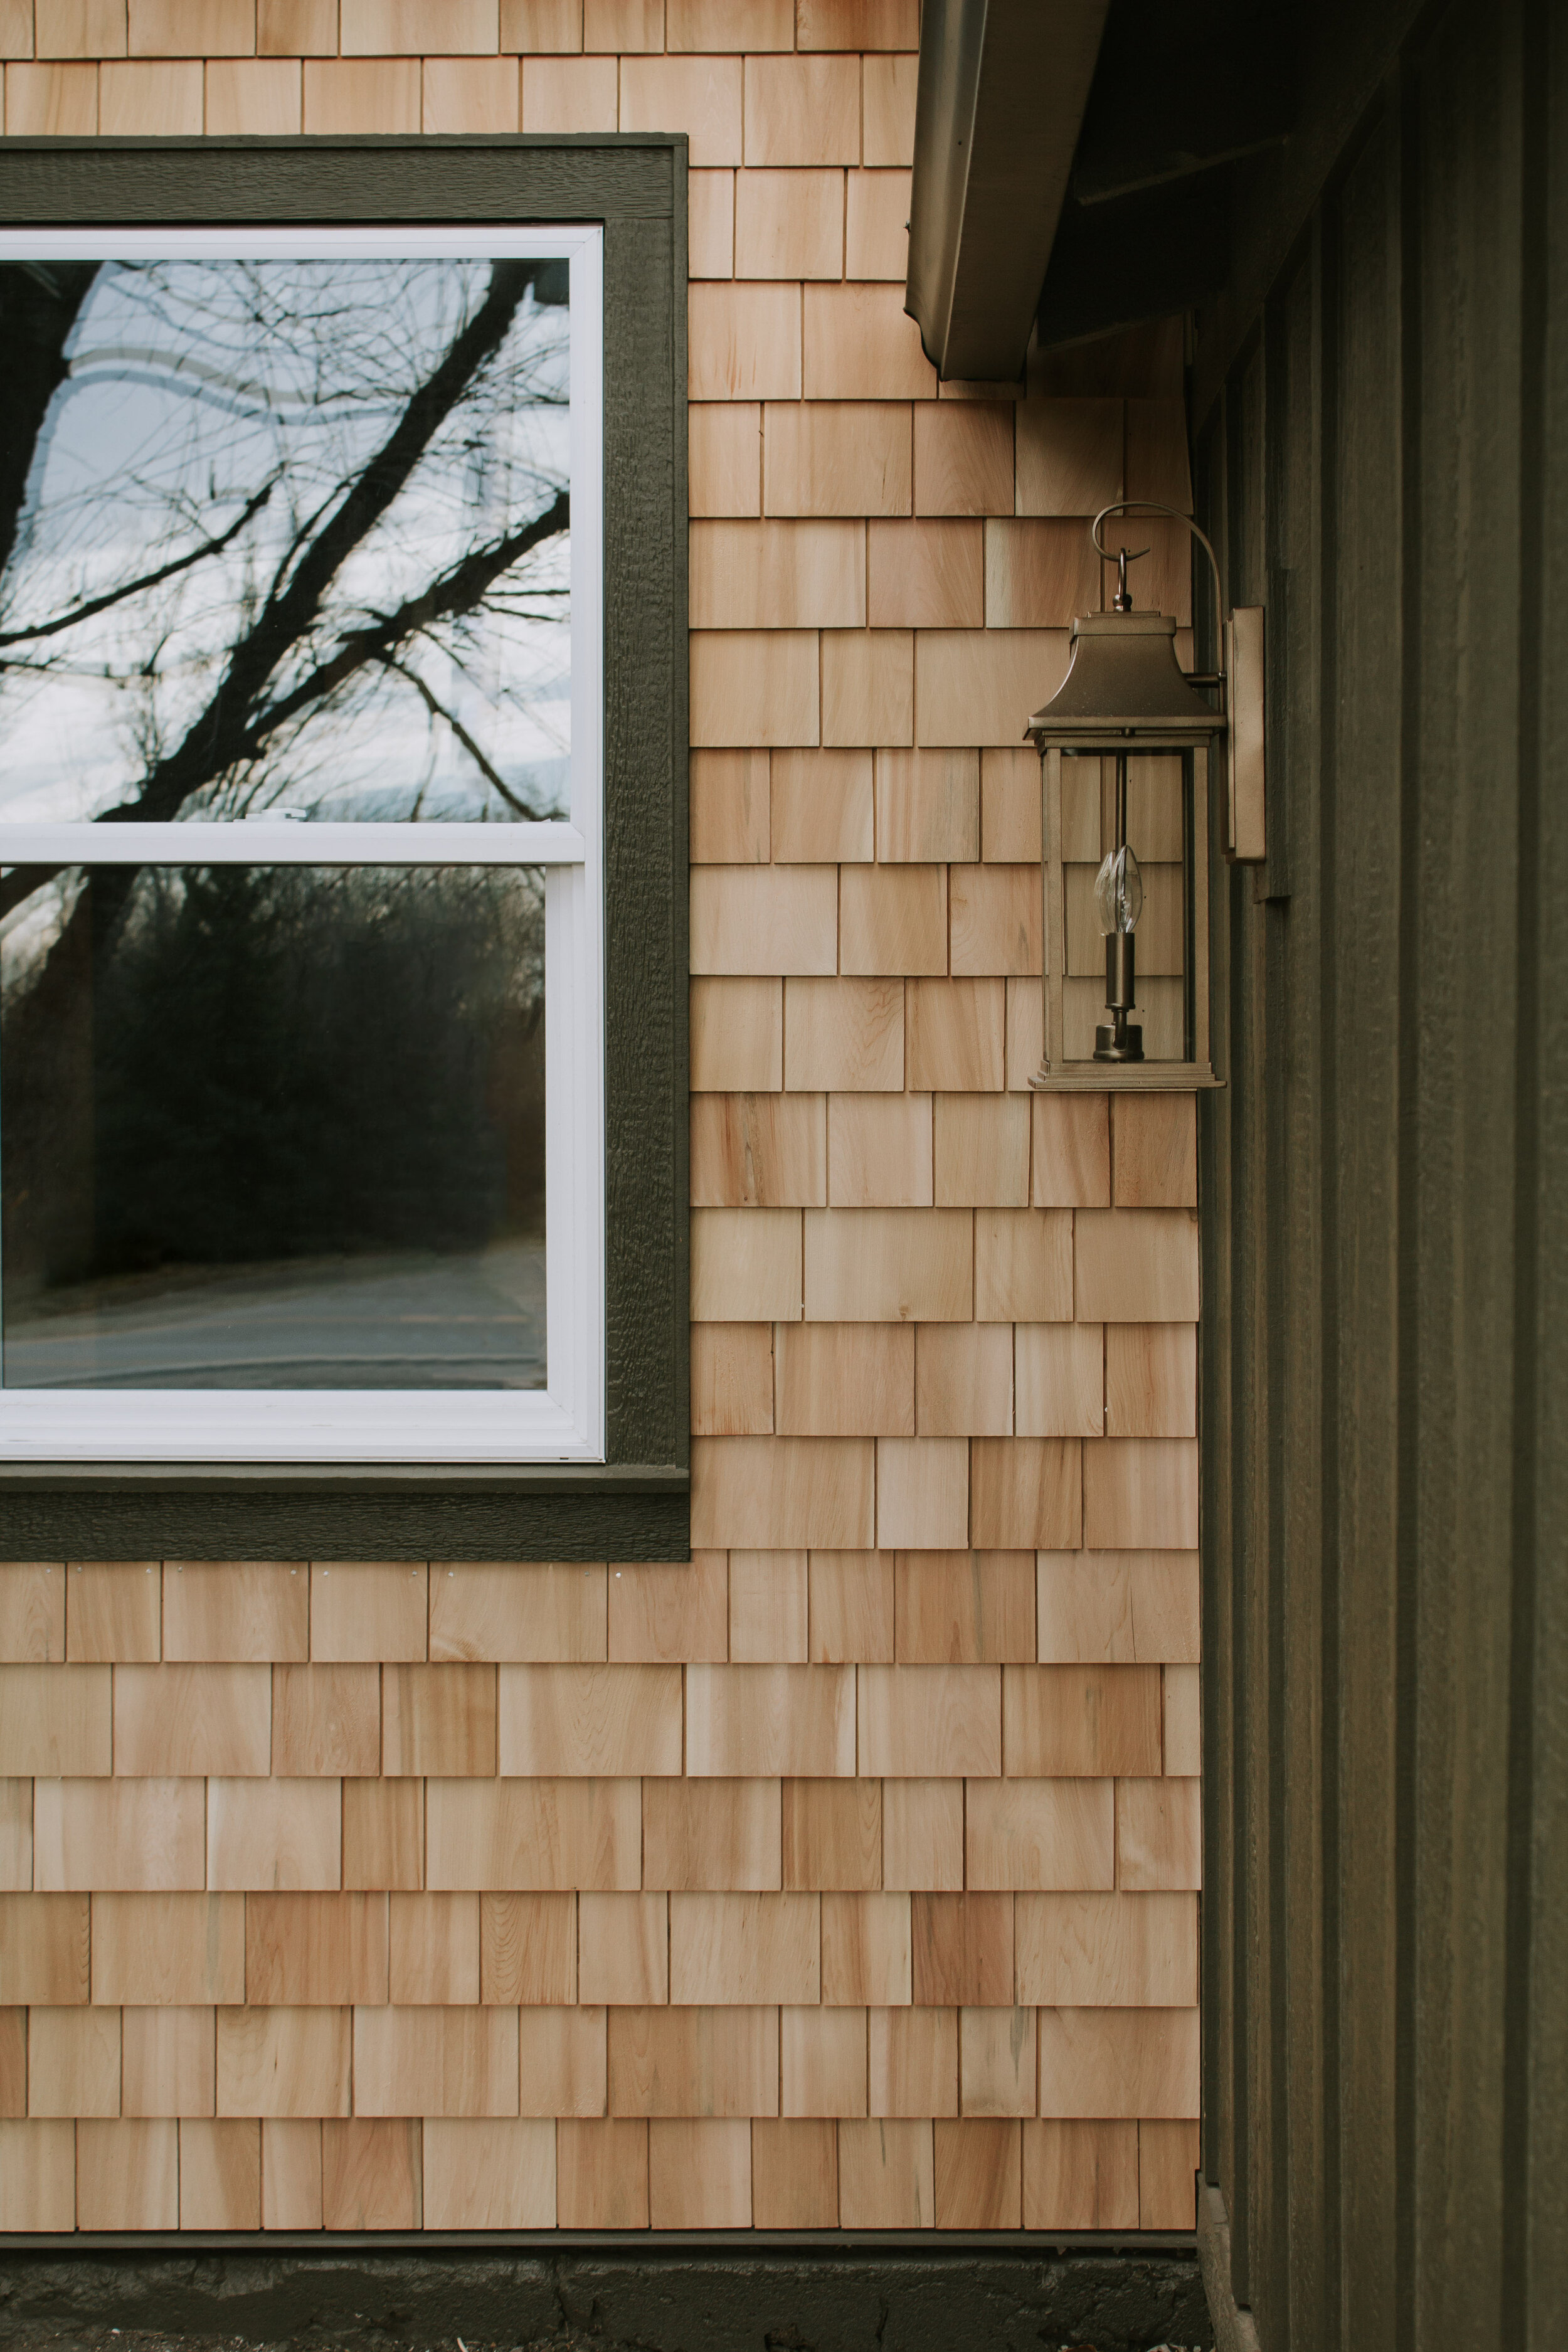 Our passthrough transformation + installing cedar shakes - Nadine Stay | Natural cedar shake shingles on our walkway between our house and garage. Replacing a door with a window. Home exterior before and after | Nadine Stay